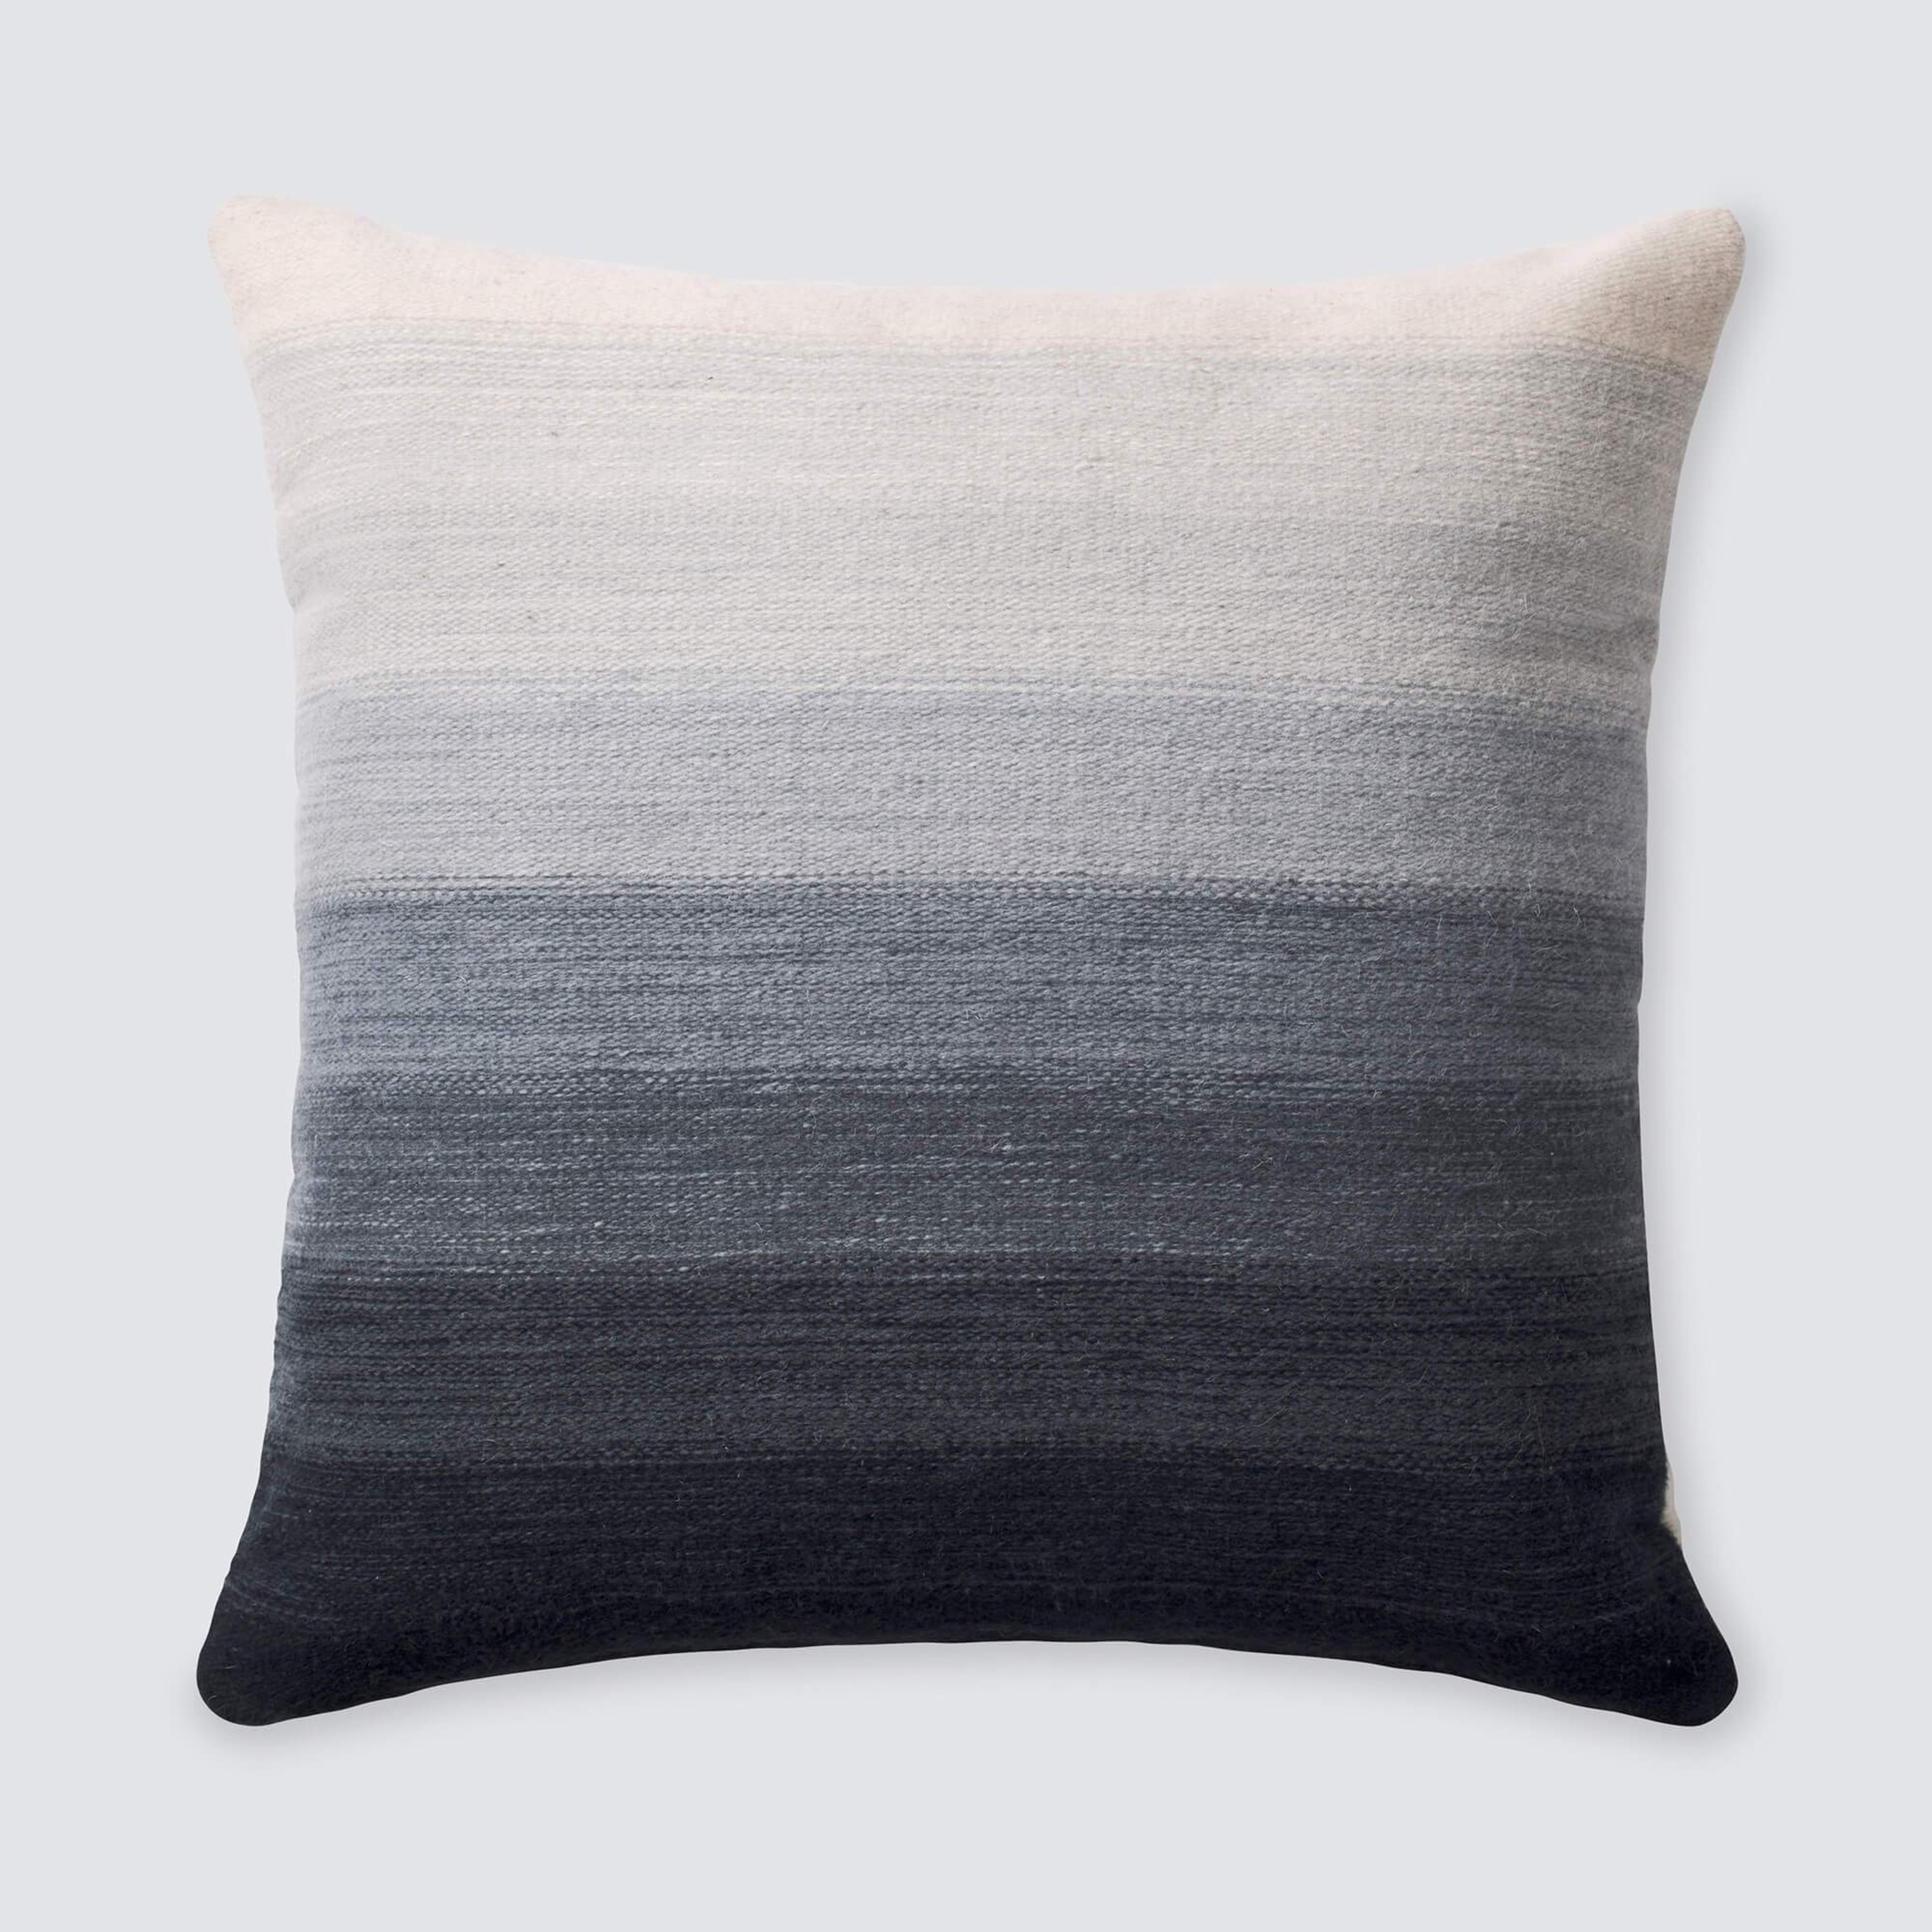 Marea Pillow - Indigo - 18 in. x 18 in. By The Citizenry - The Citizenry